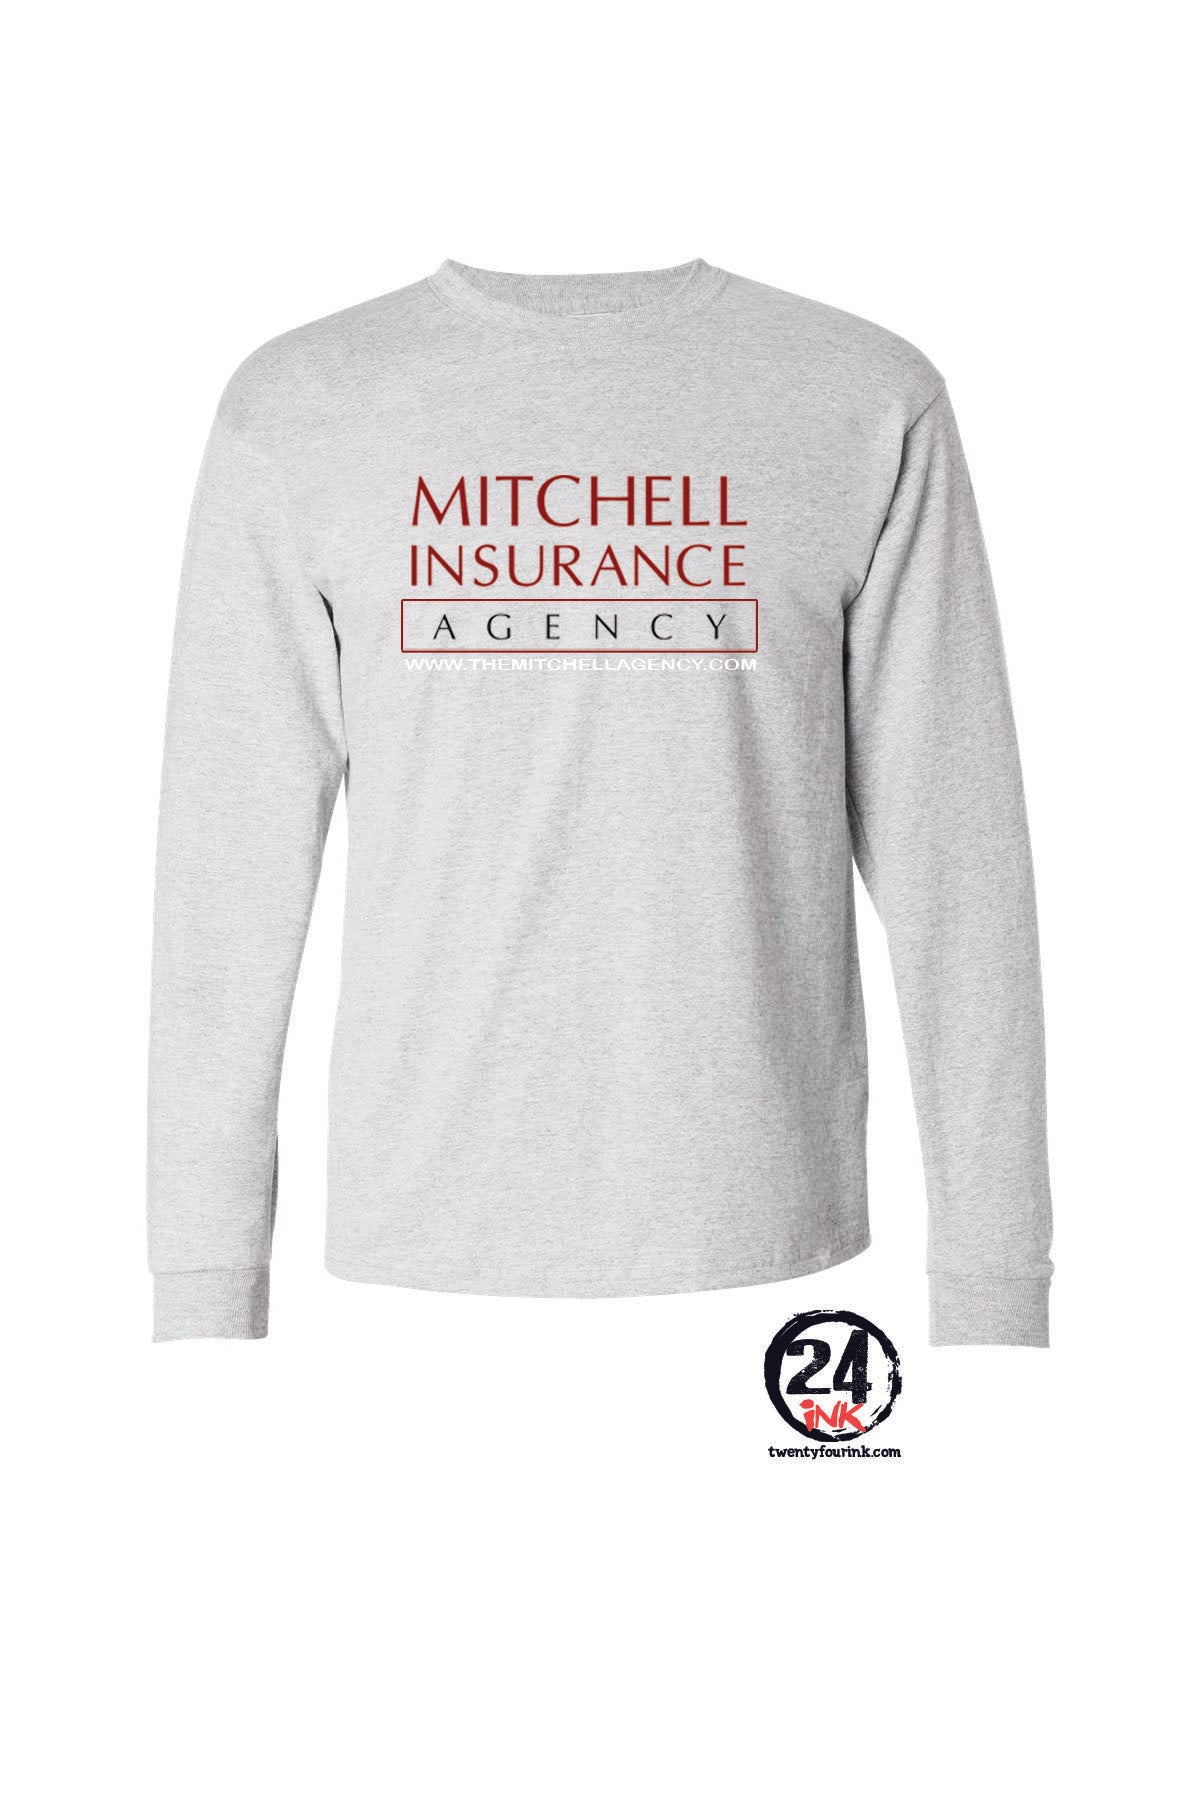 Mitchell Agency Front Long Sleeve Shirt